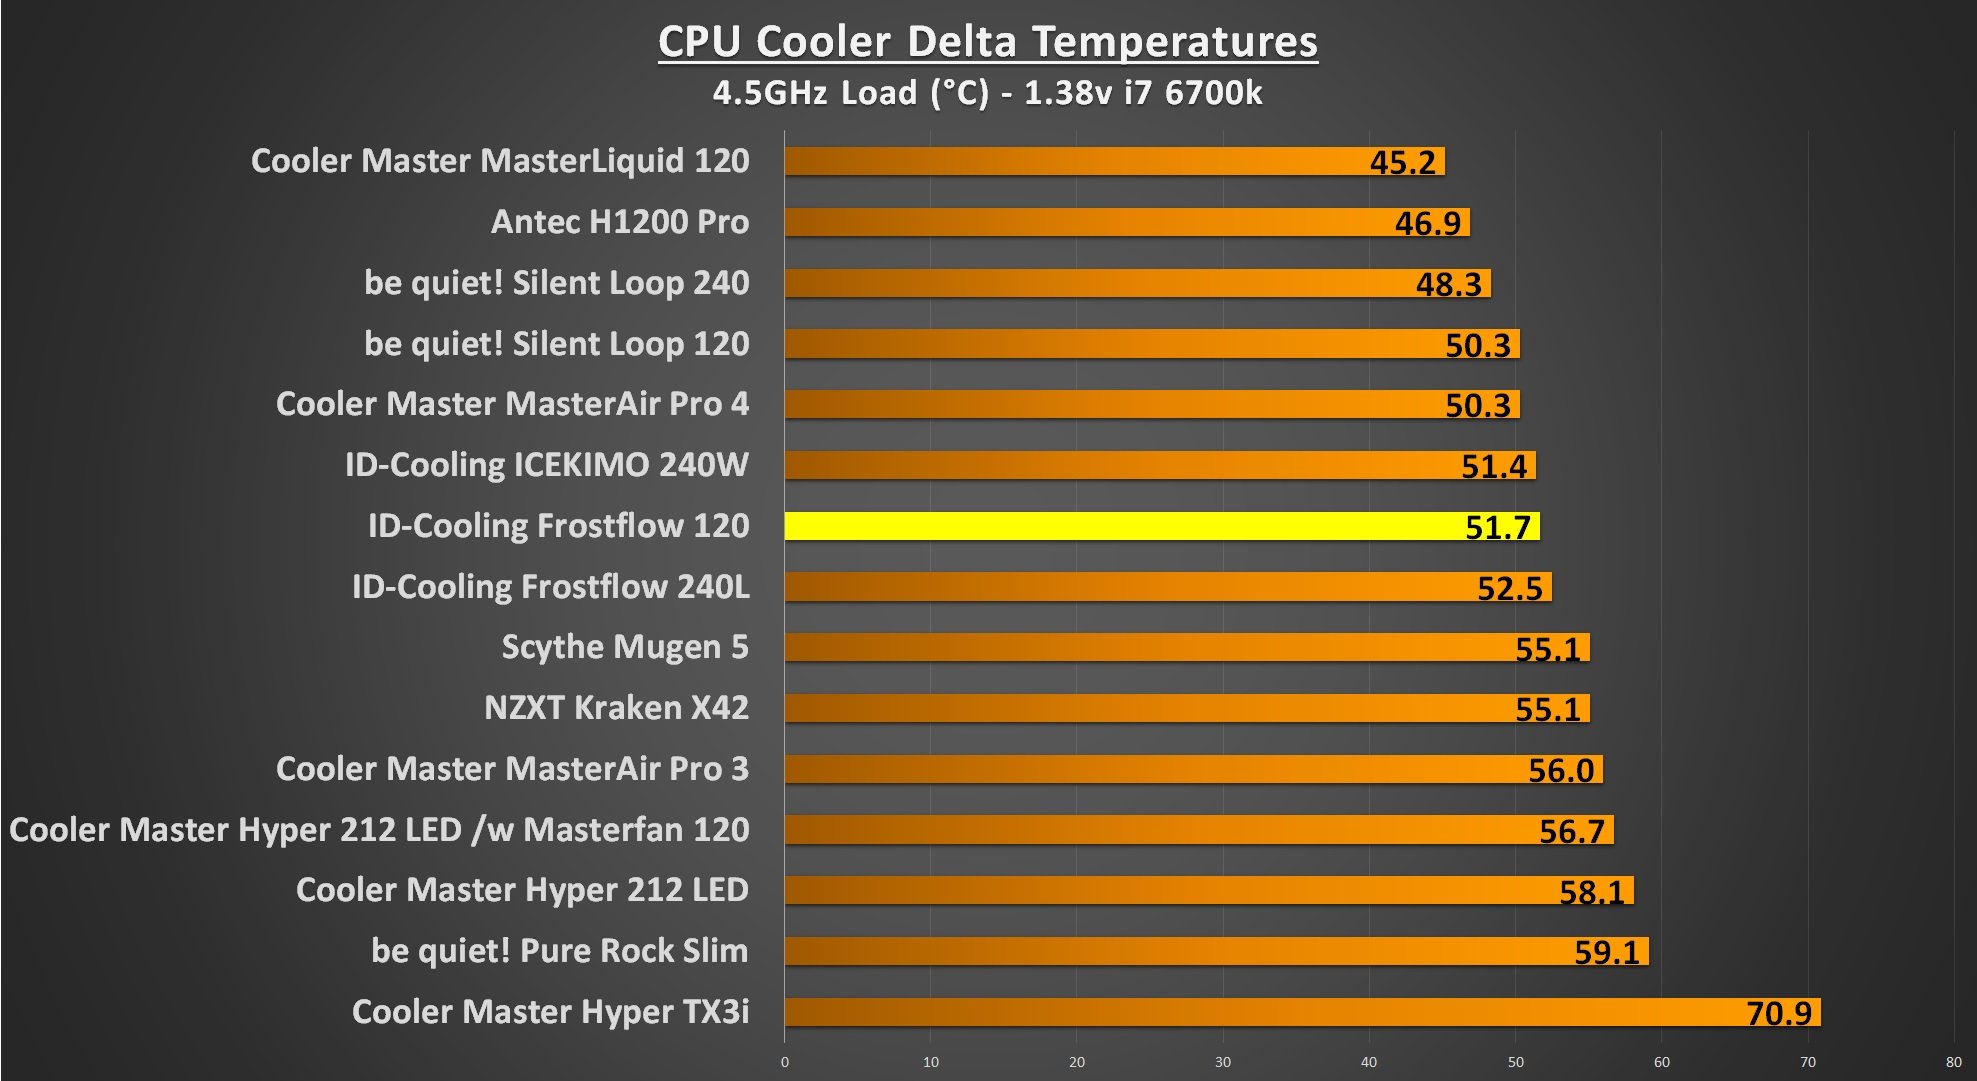 ID-Cooling Frostflow 4.5Ghz Load